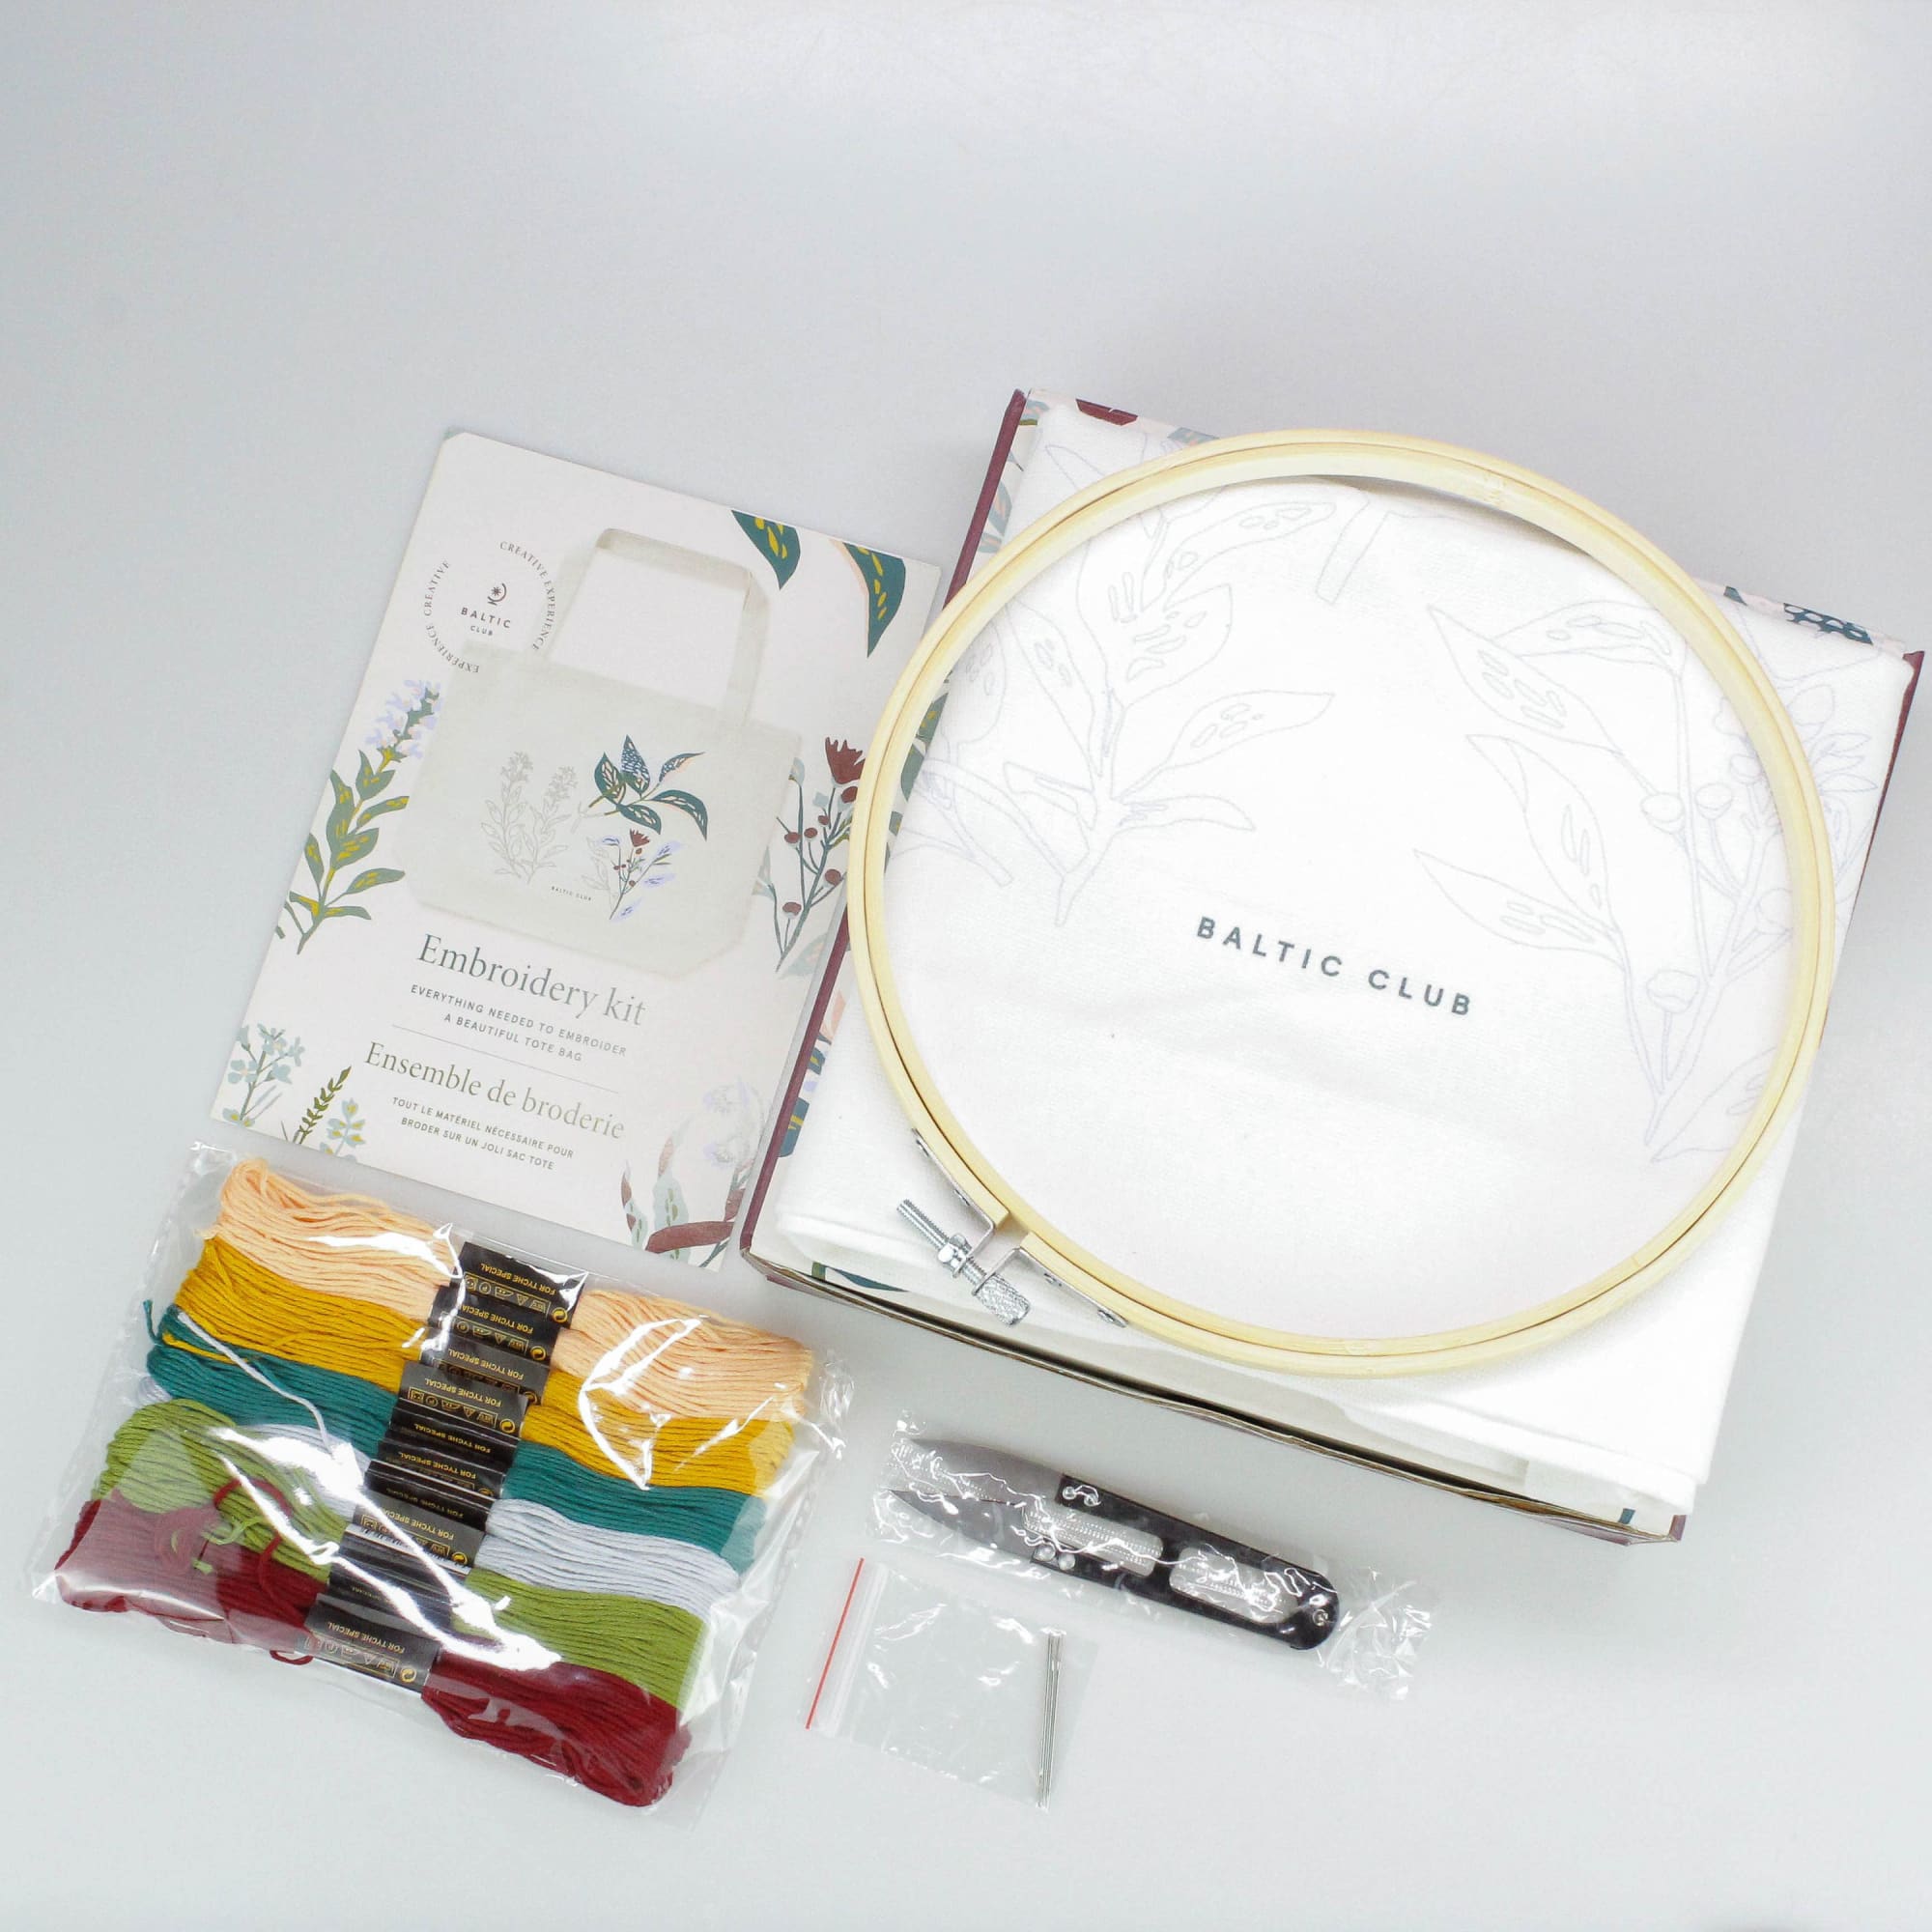 The elements of the embroidery kit for adults by the Baltic Club